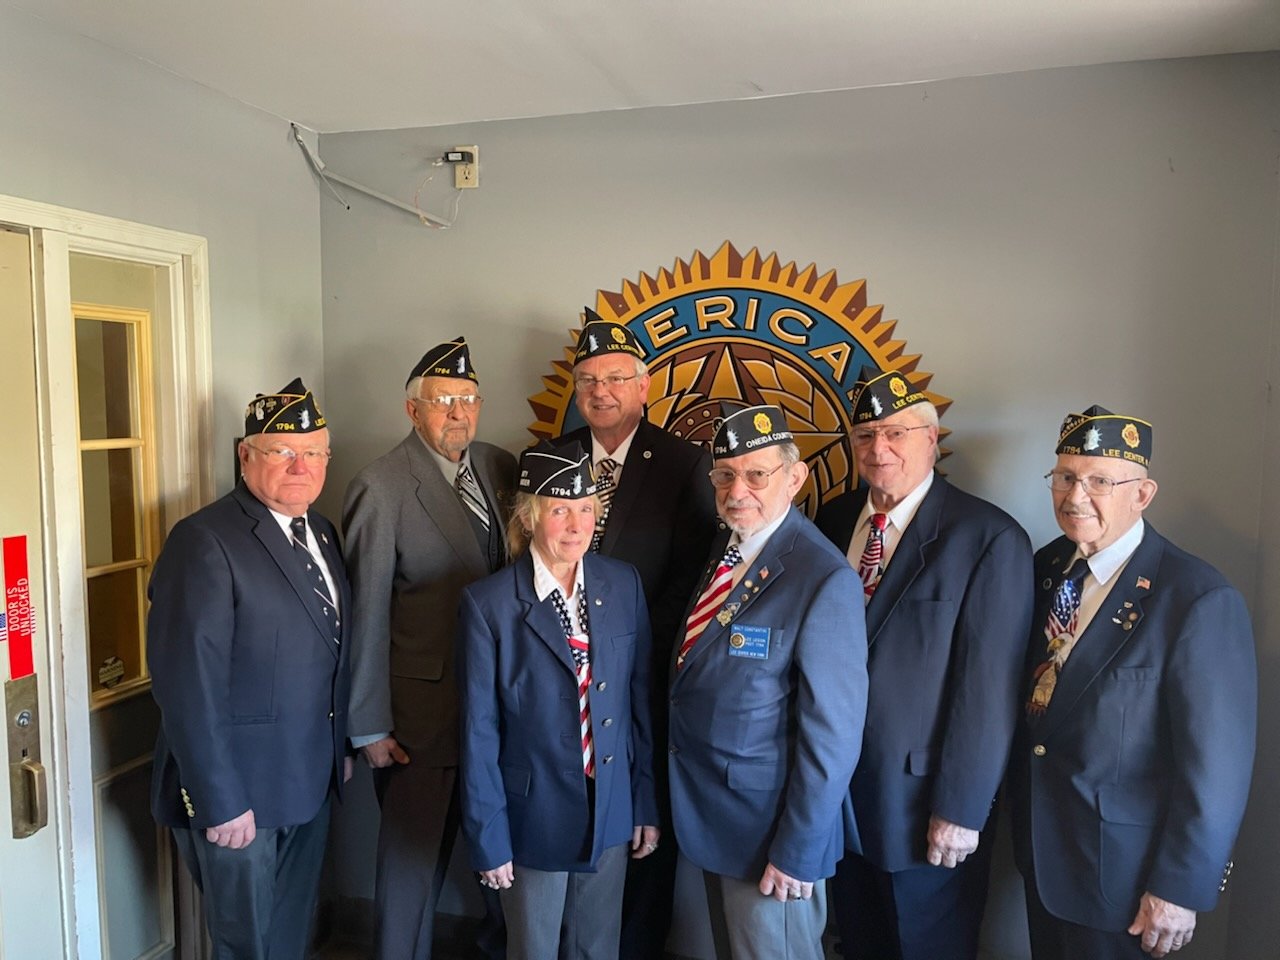 The Lee Legion Post 1794 held its annual installation of officers ceremony on Friday. Among the officers are, from left: Dave Combs, second vice commander; Roger Perry, chaplain; Lucy Burgard, third vice commander; Lamont O’Shei, commander; Walt Constantini, first vice commander; Bill Denchy, finance officer; and George Cook, executive board member. Not pictured, Jackie Sweeney, adjutant; and Jarrod Decker, sergeant-at-arms.